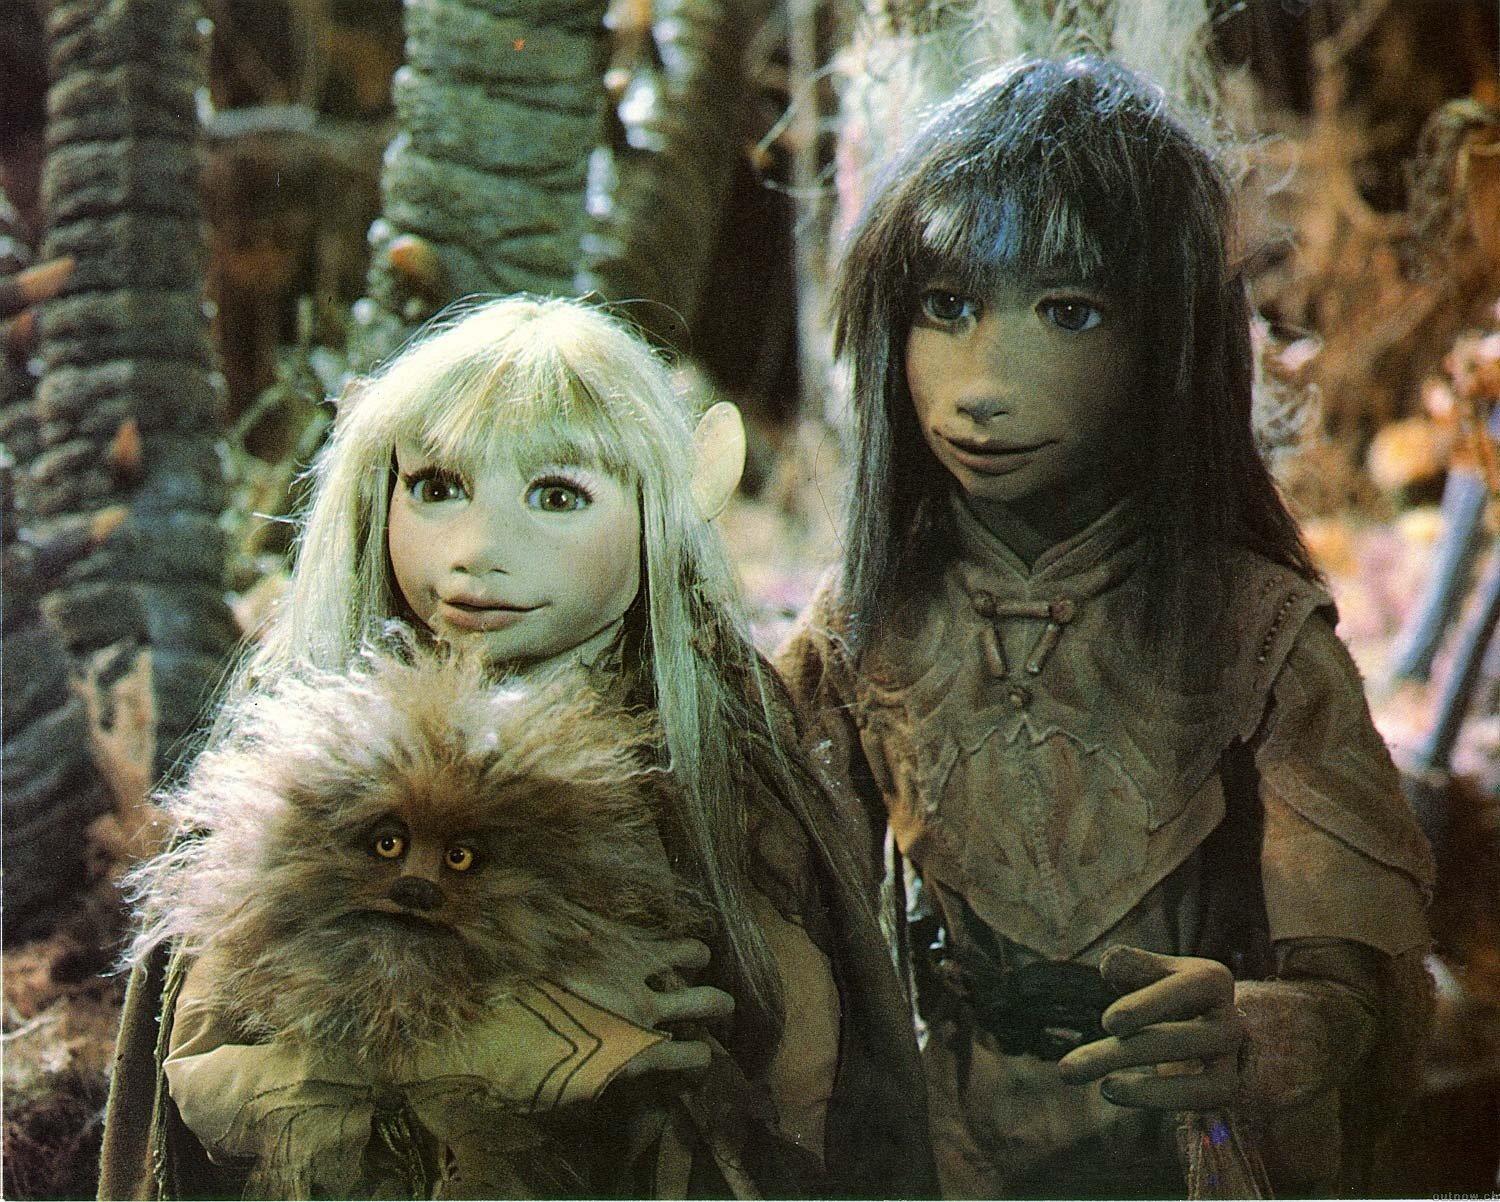 Kira, Jen and Fizzgig The Dark Crystal picture image